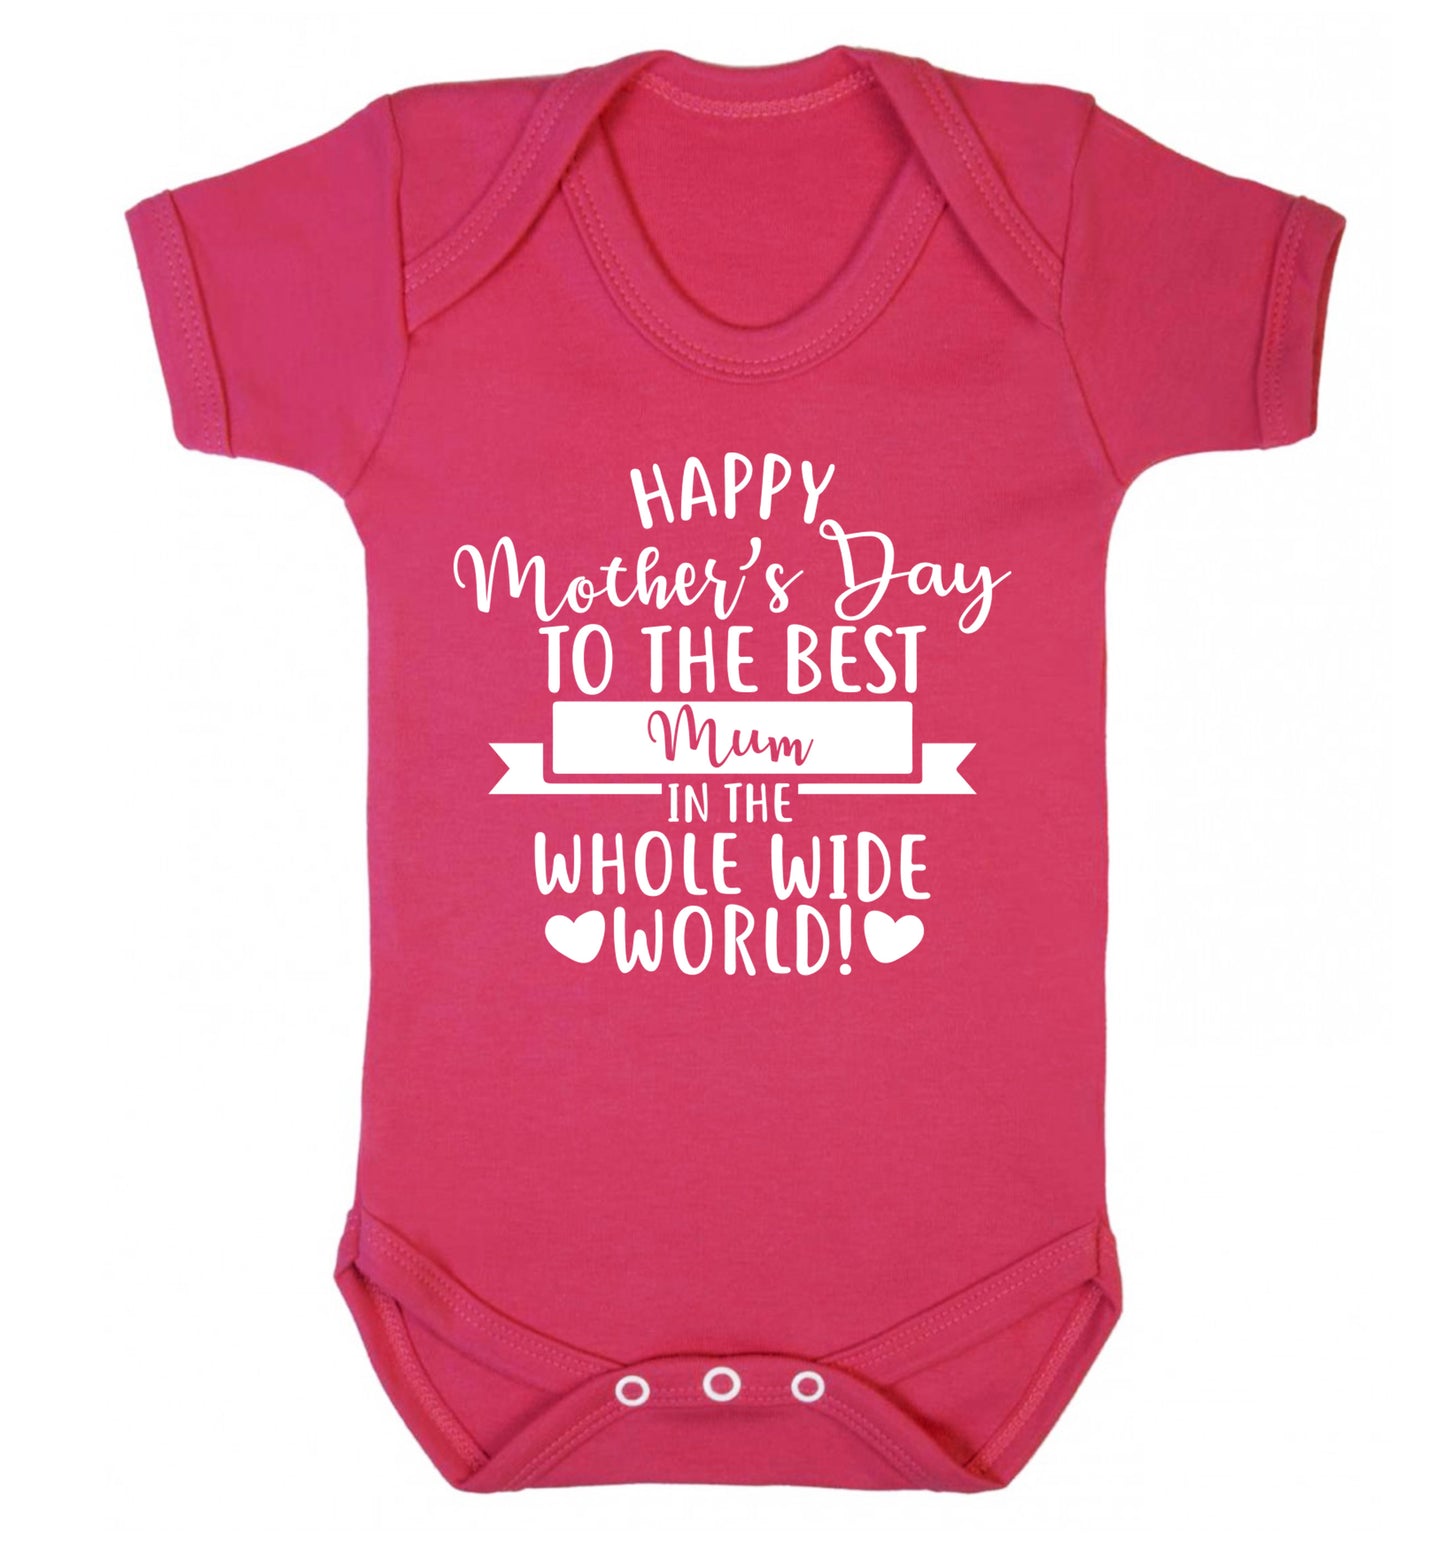 Happy Mother's Day to the best mum in the whole wide world! Baby Vest dark pink 18-24 months